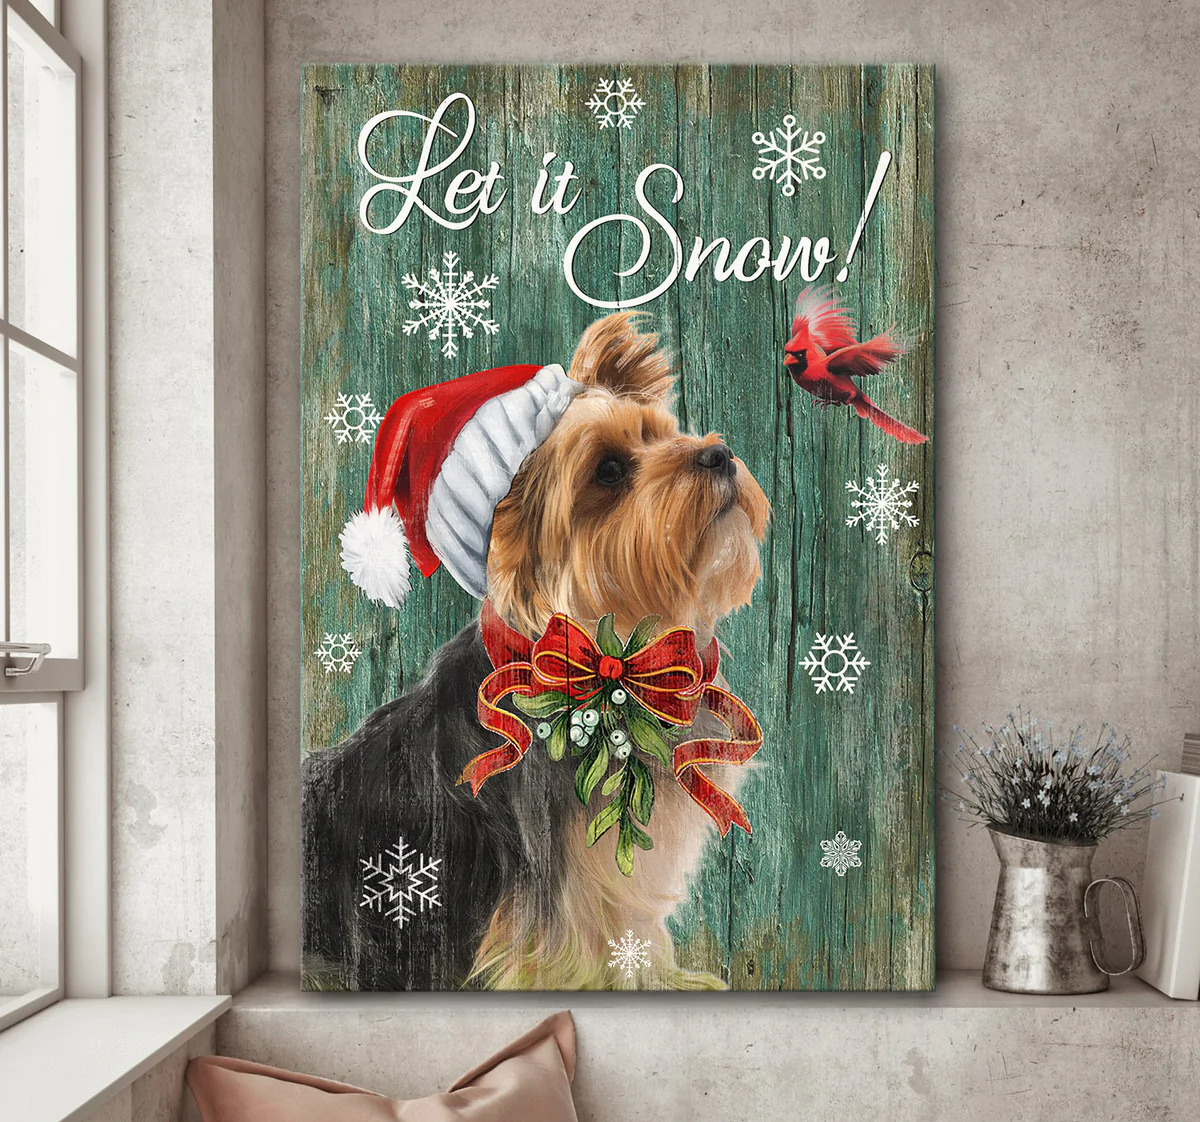 Yorkshire Terrier Dog Portrait Canvas - Yorkshire Terrier, Cardinal, Christmas - Gift for Yorkshire Terrier, Dog Lovers - Let It Snow Canvas